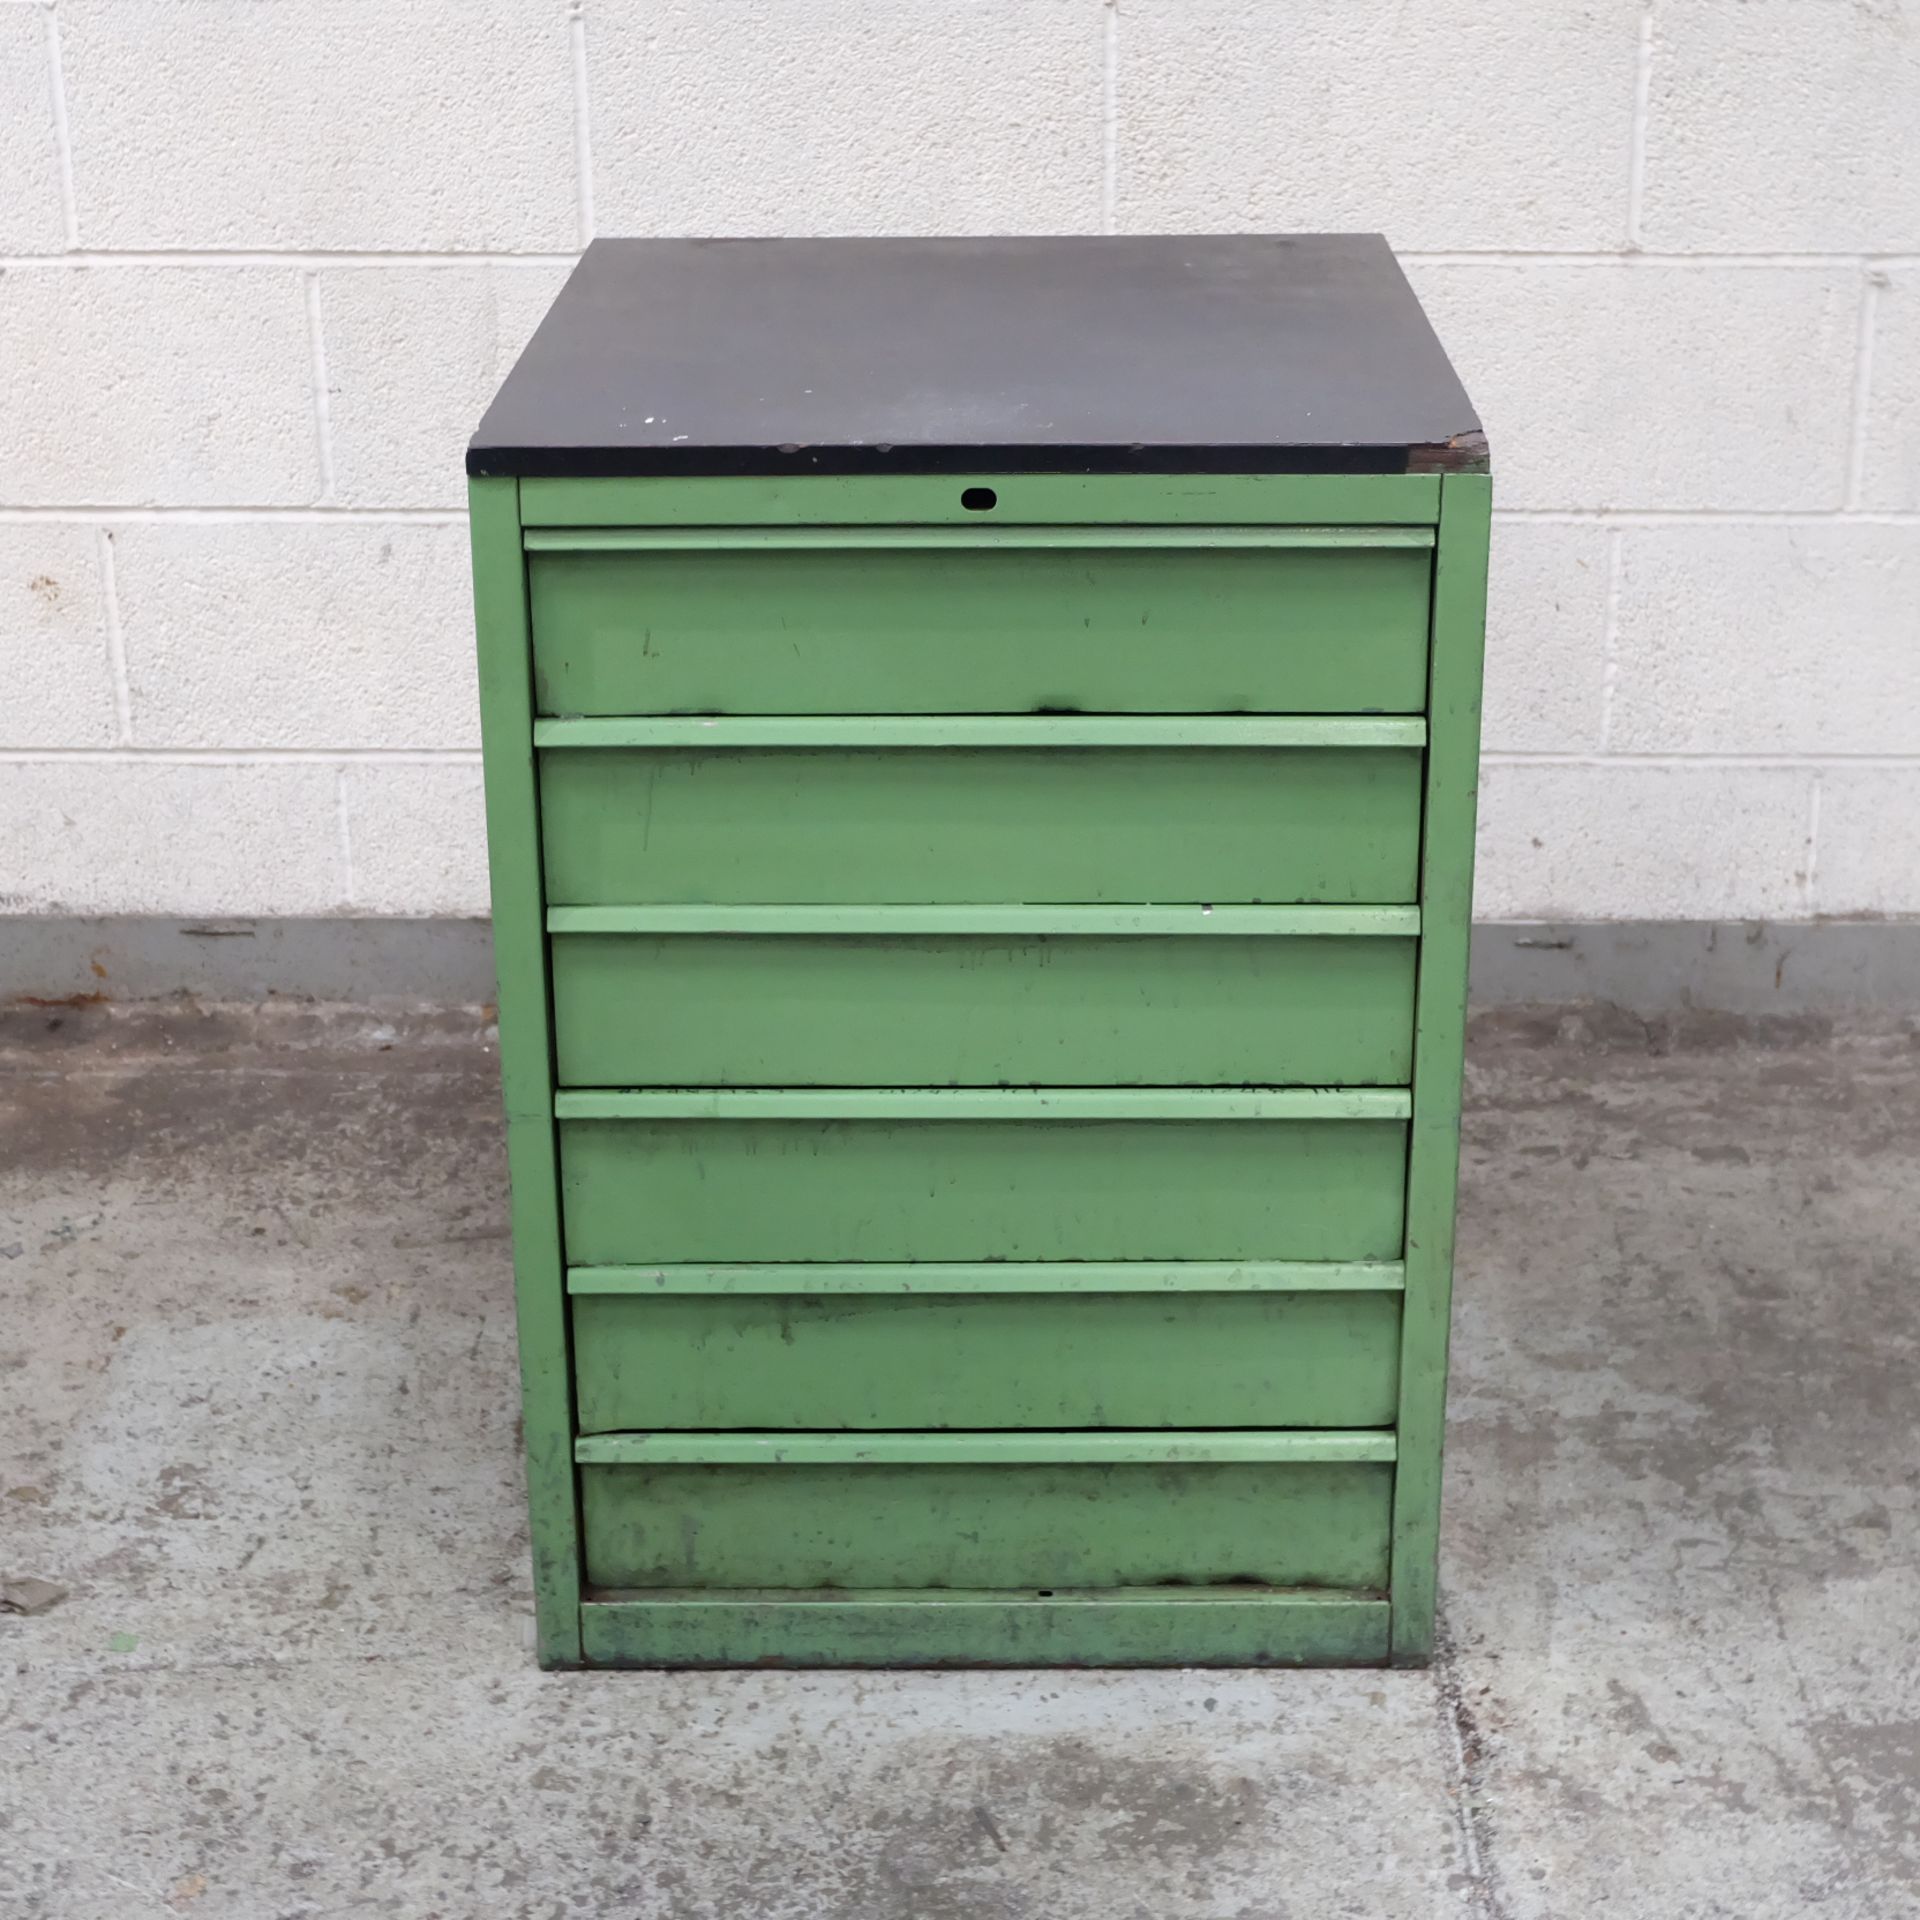 A 6 Drawer Tool Chest, 655mm x 590mm x 820mm High. - Image 2 of 6